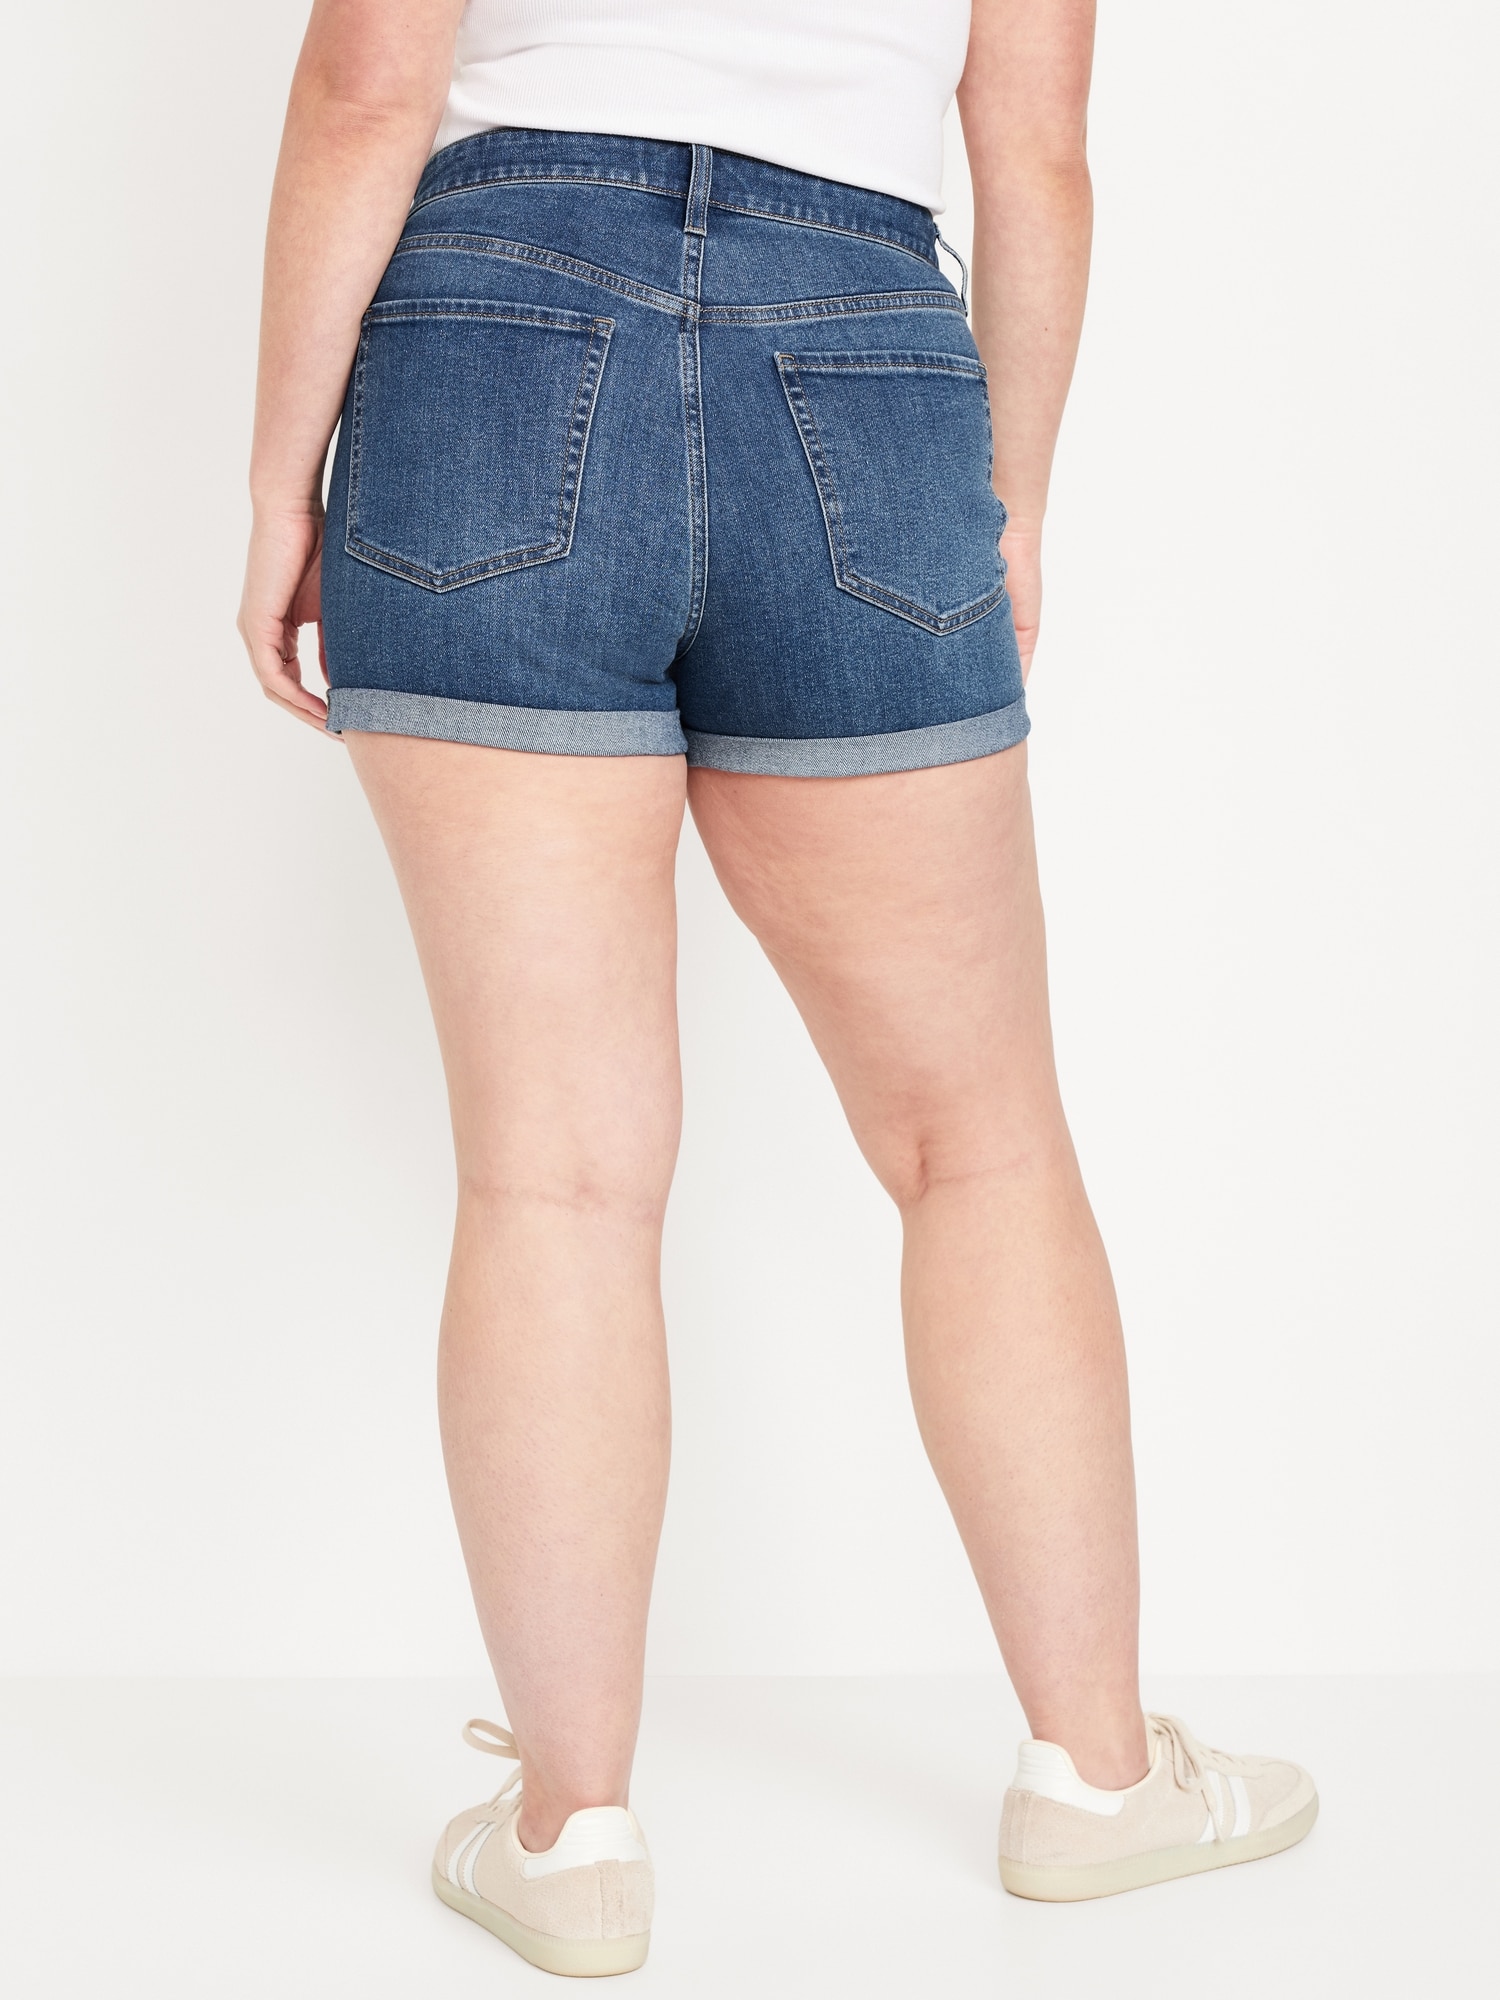 High-Waisted OG Cuffed Jean Shorts -- 3-inch inseam | Old Navy